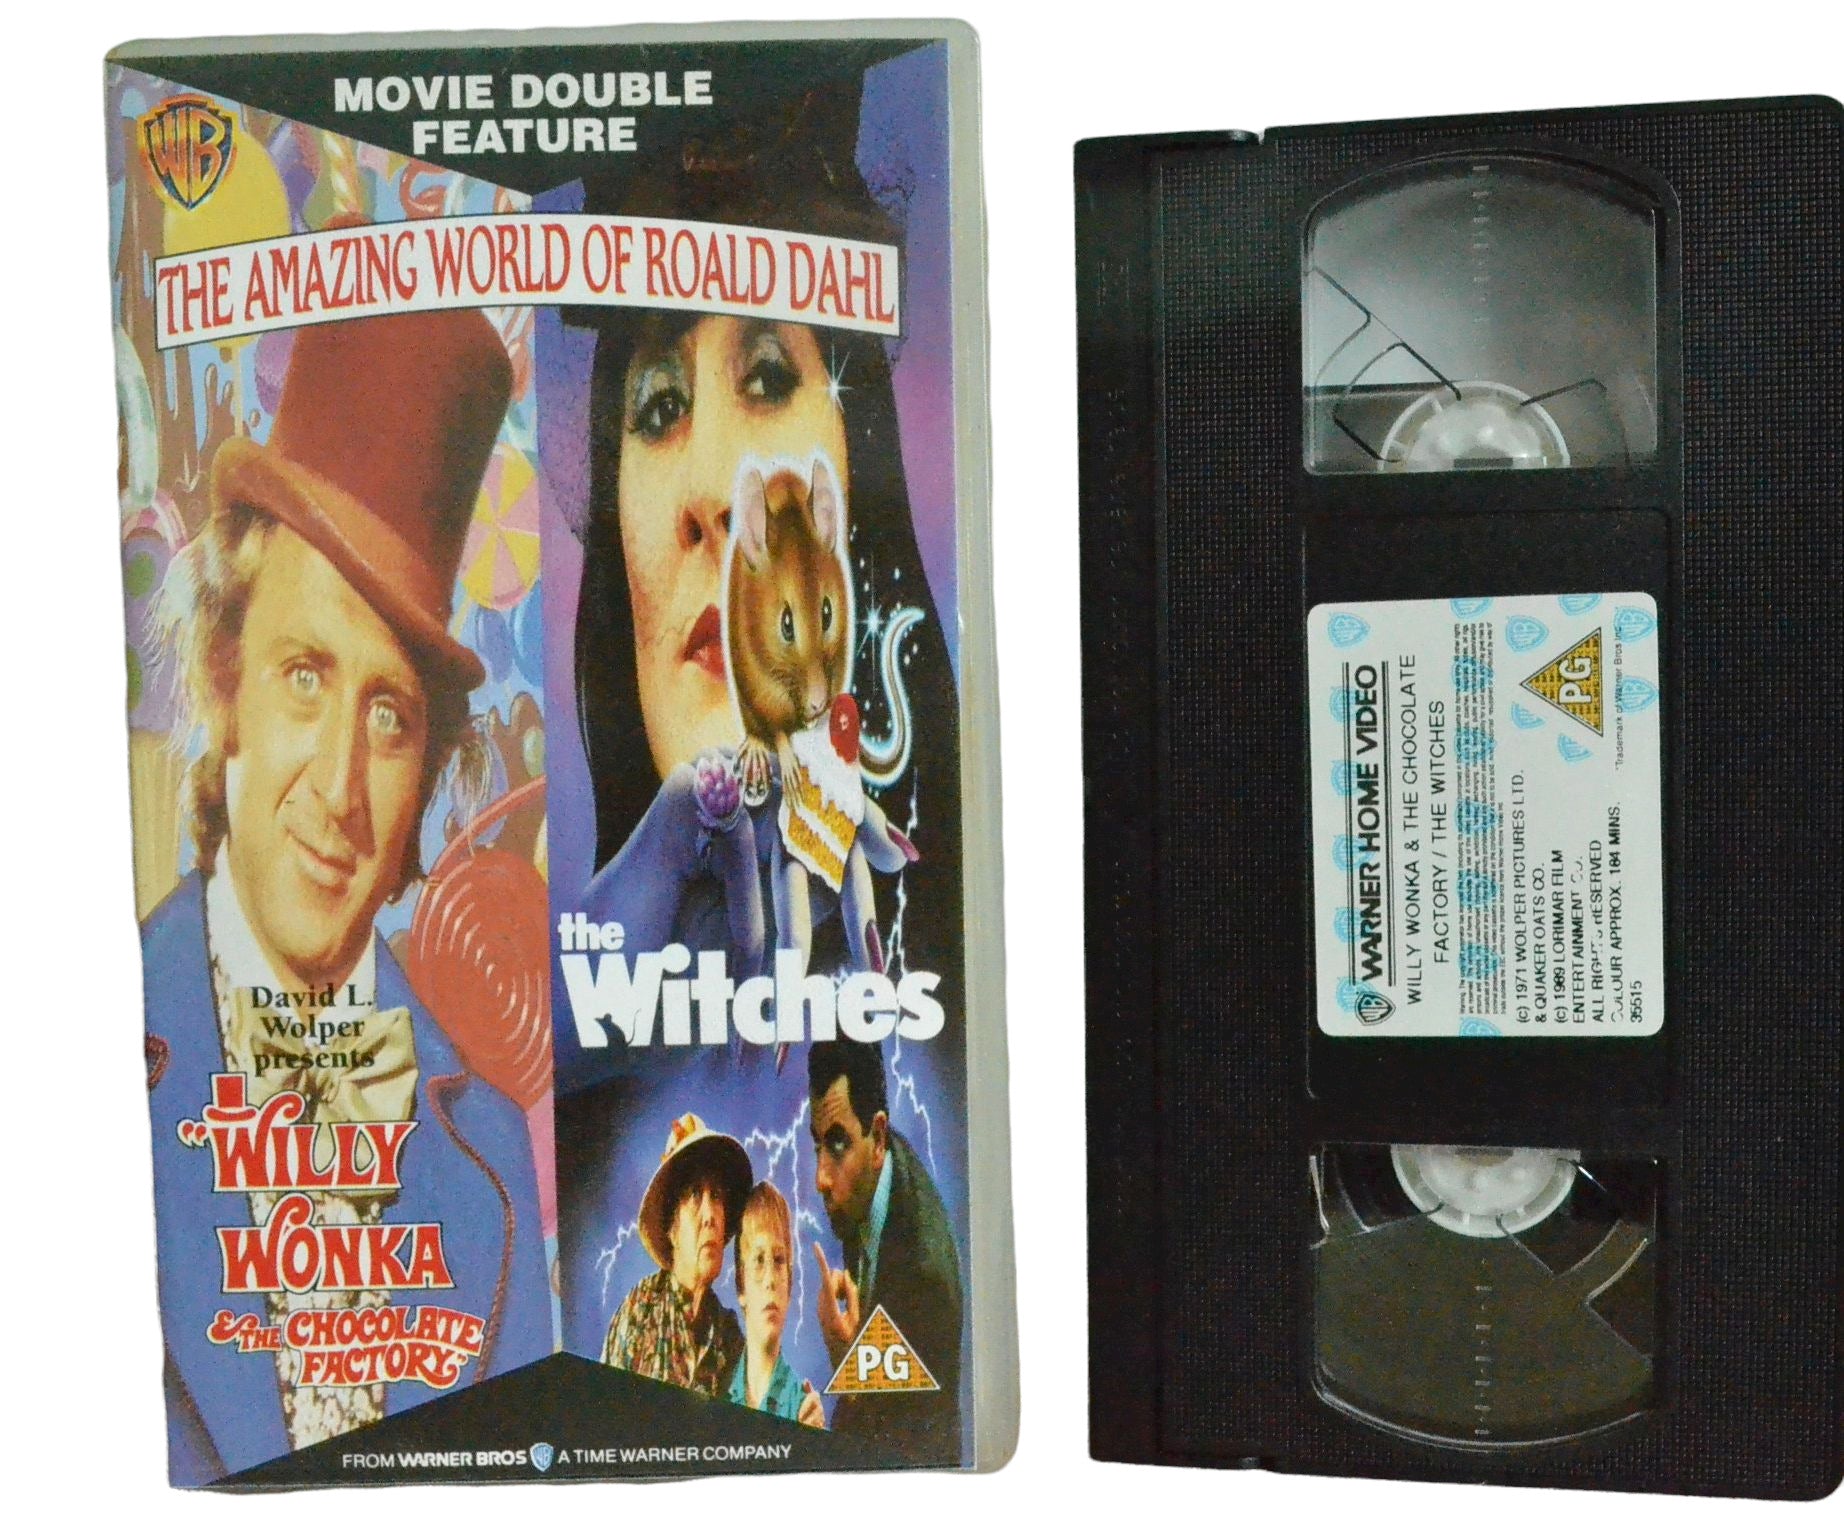 Willy Wonka & The Chocolate Factory / The Witches - Gene Wilder - Warner Home Video - Children's - Pal VHS-